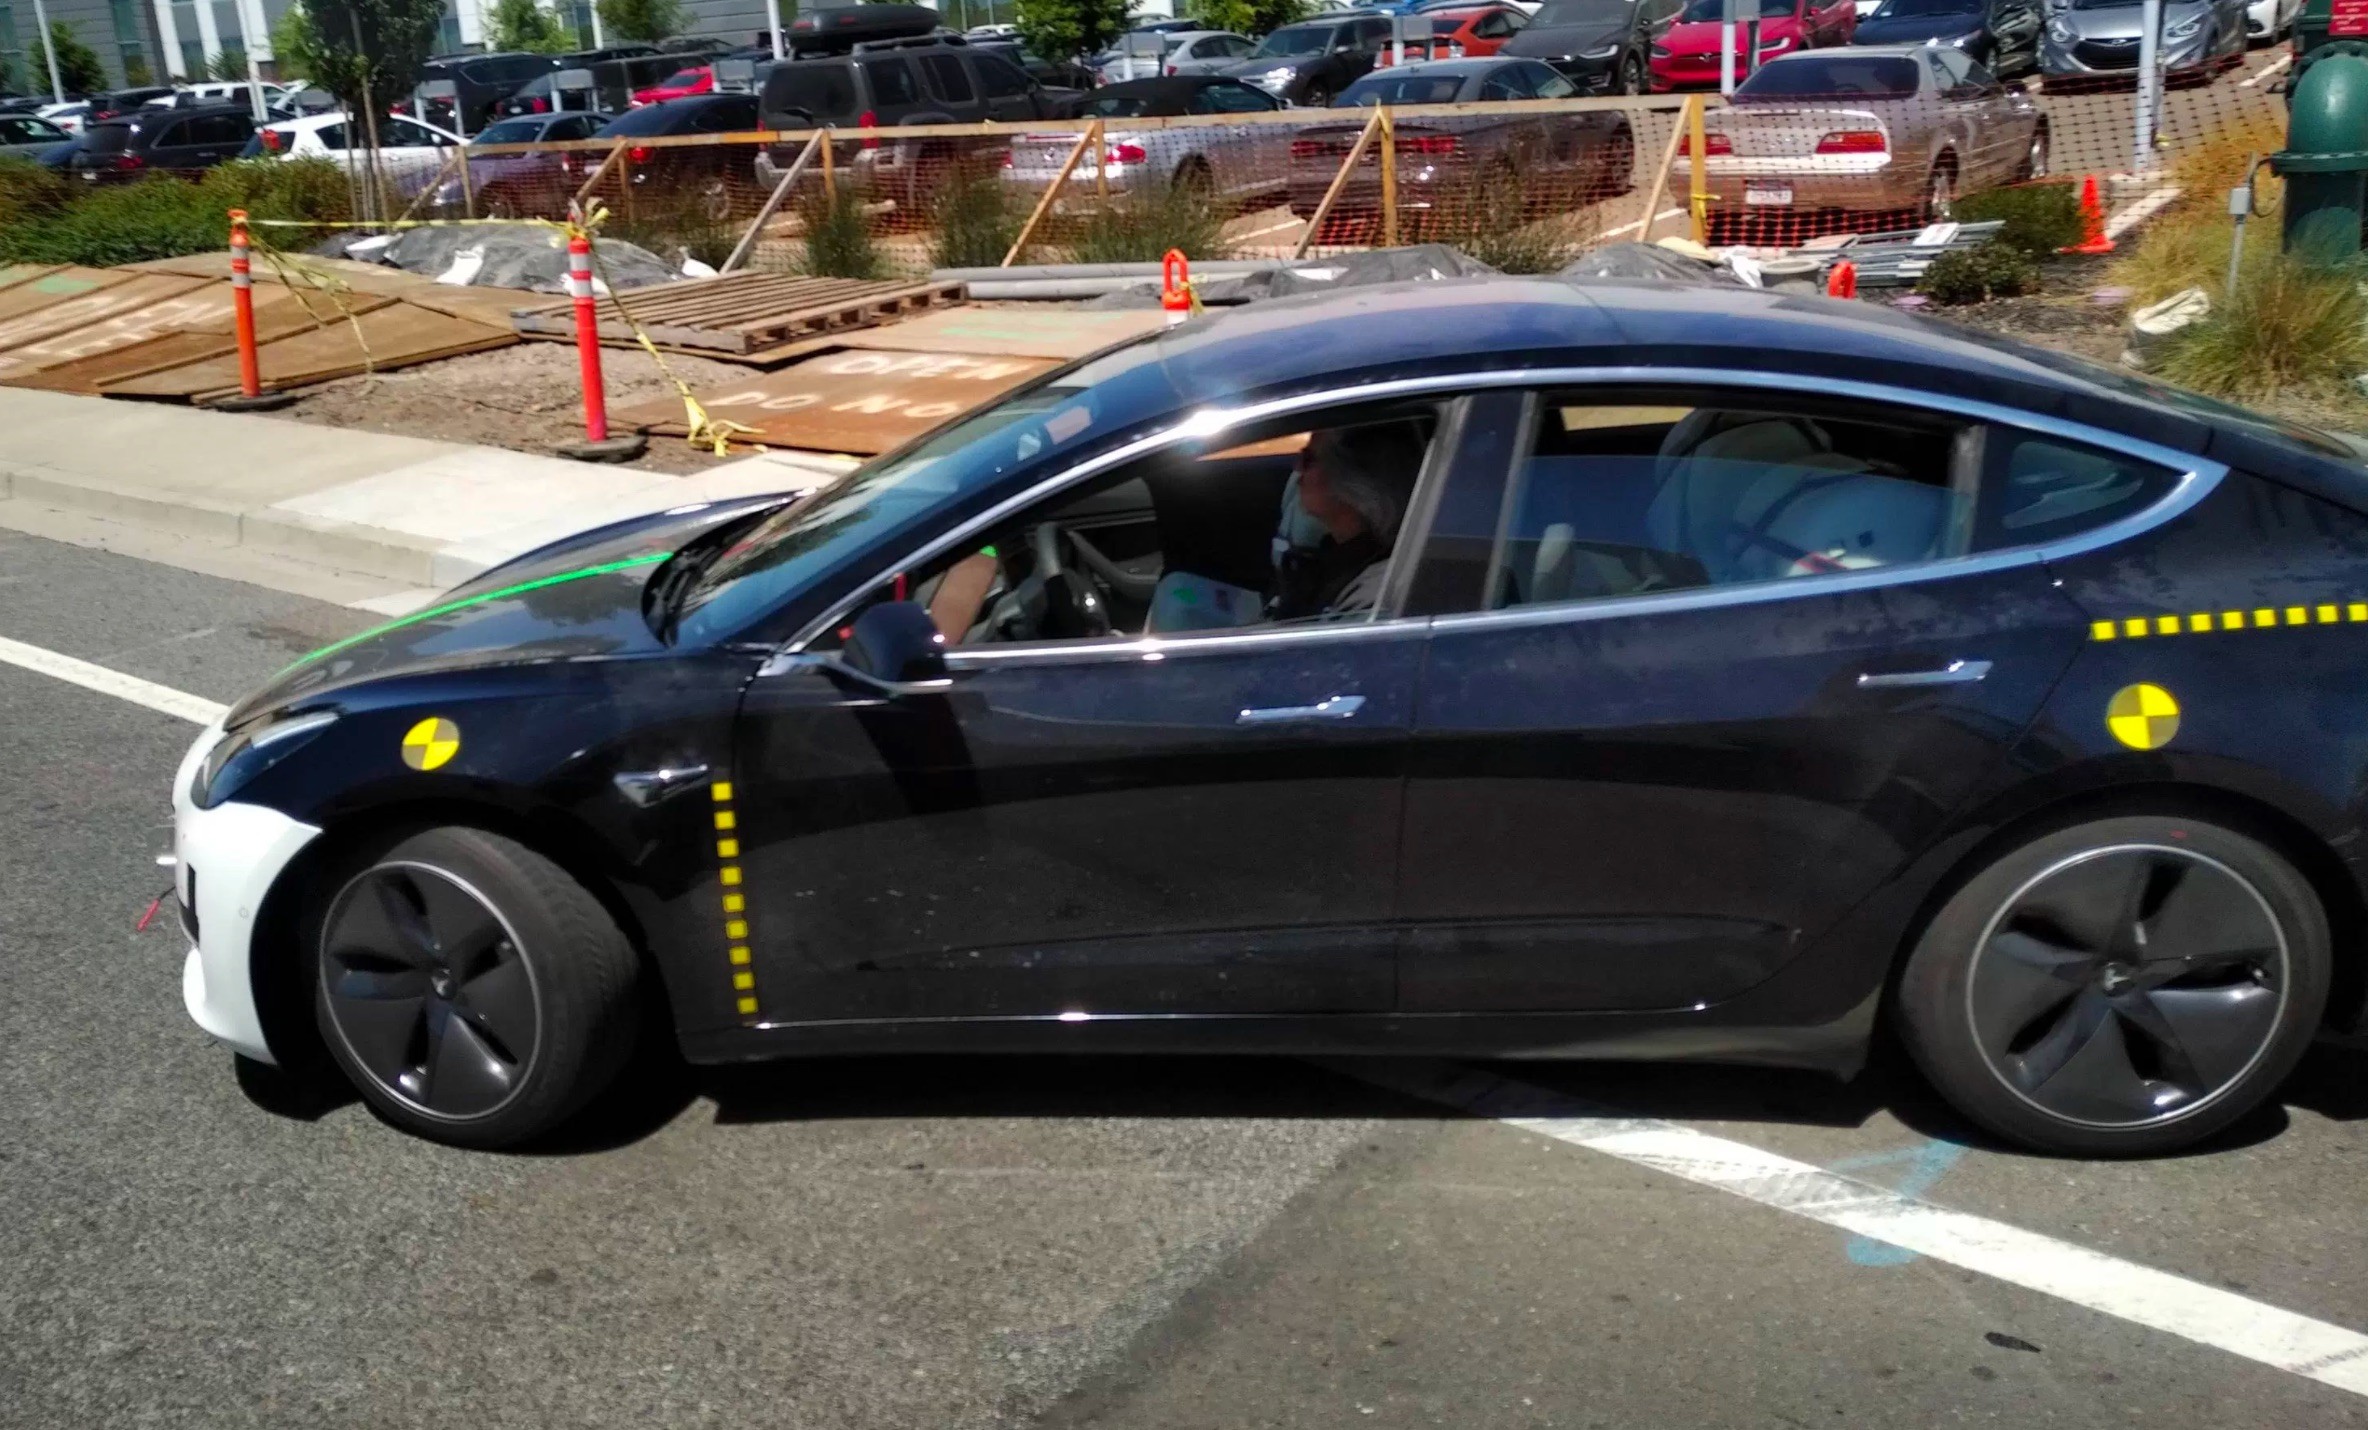 Tesla Model 3 s body structure is a strategic blend of aluminum and ultra high strength steel